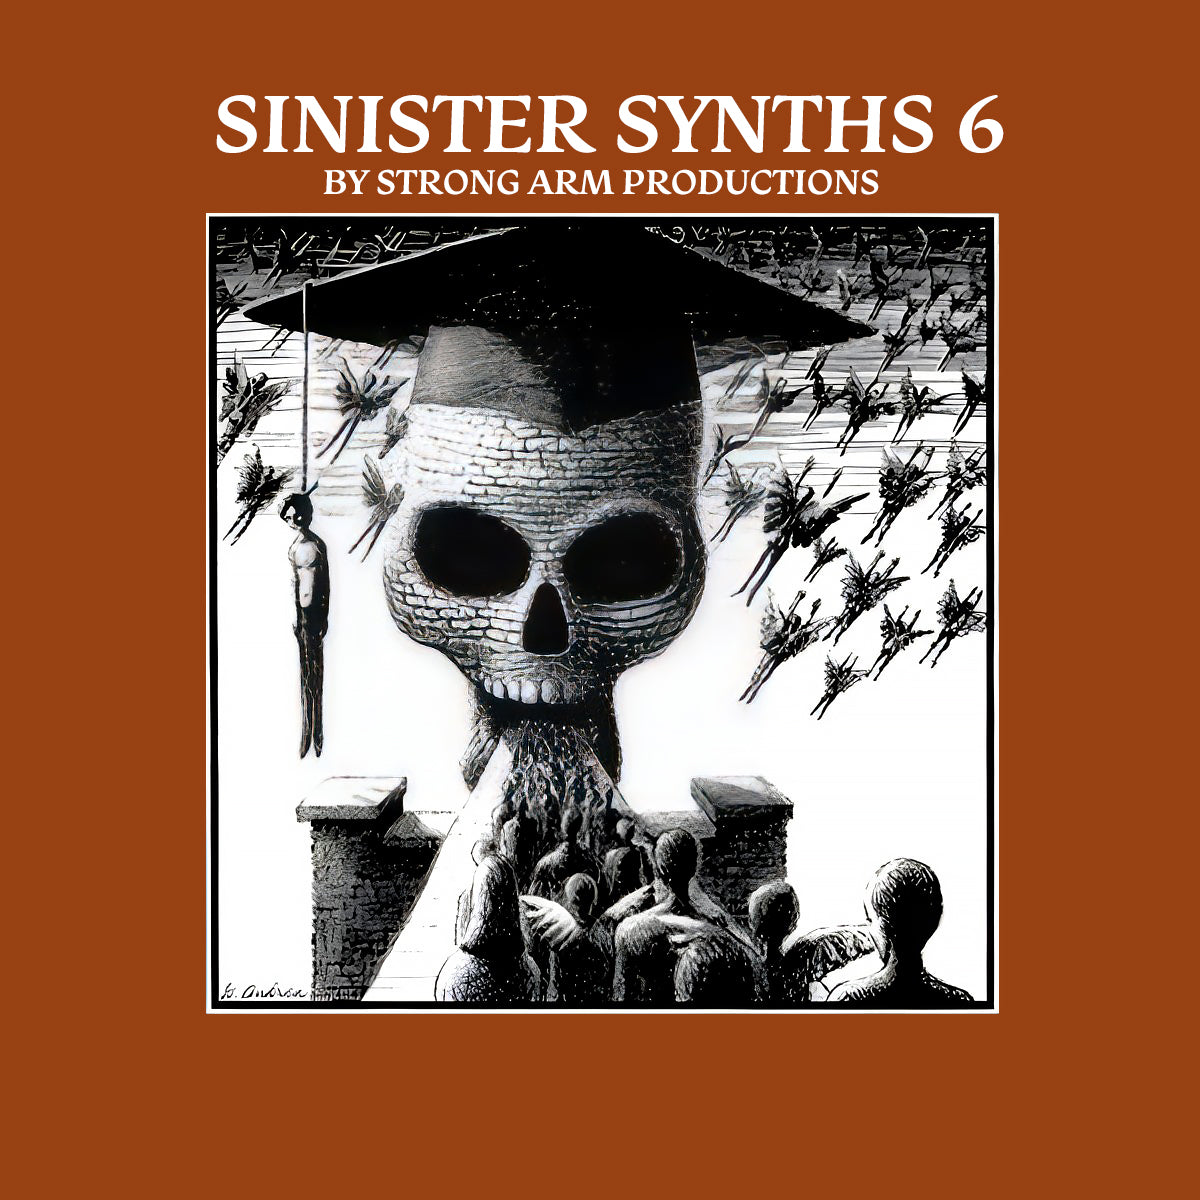 Sinister Synths 6